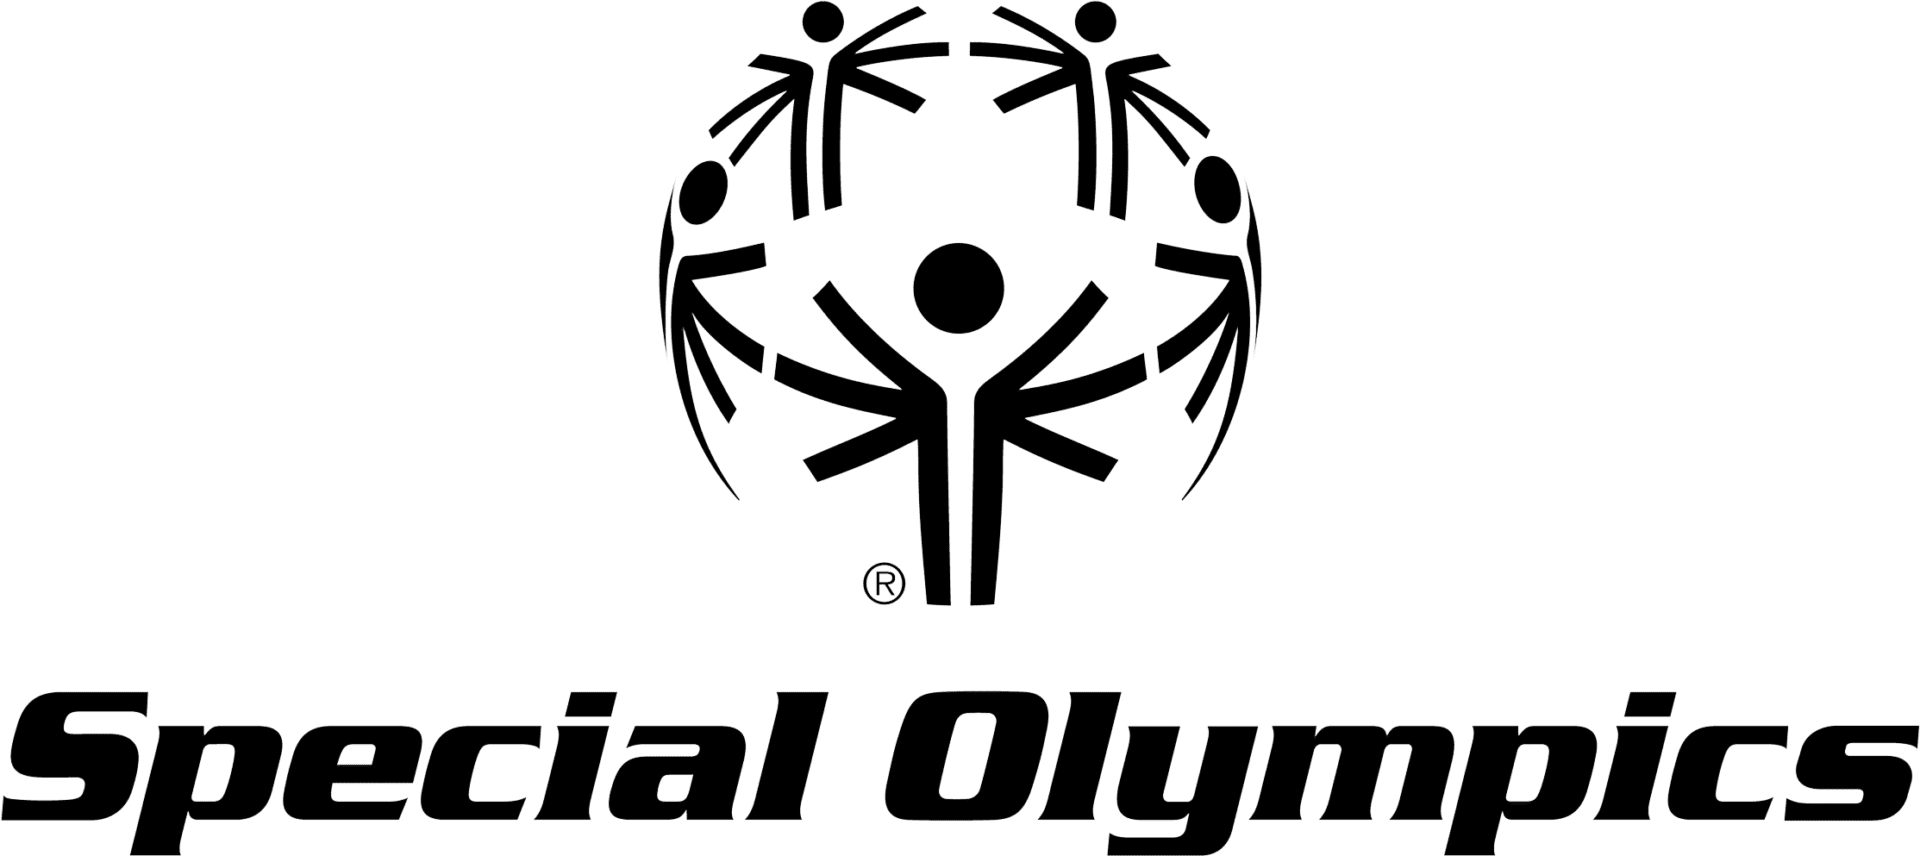 https://murraylaw.legal/wp-content/uploads/2023/05/177-1774851_special-olympics-logo-k-special-olympics-chicago-logo.png